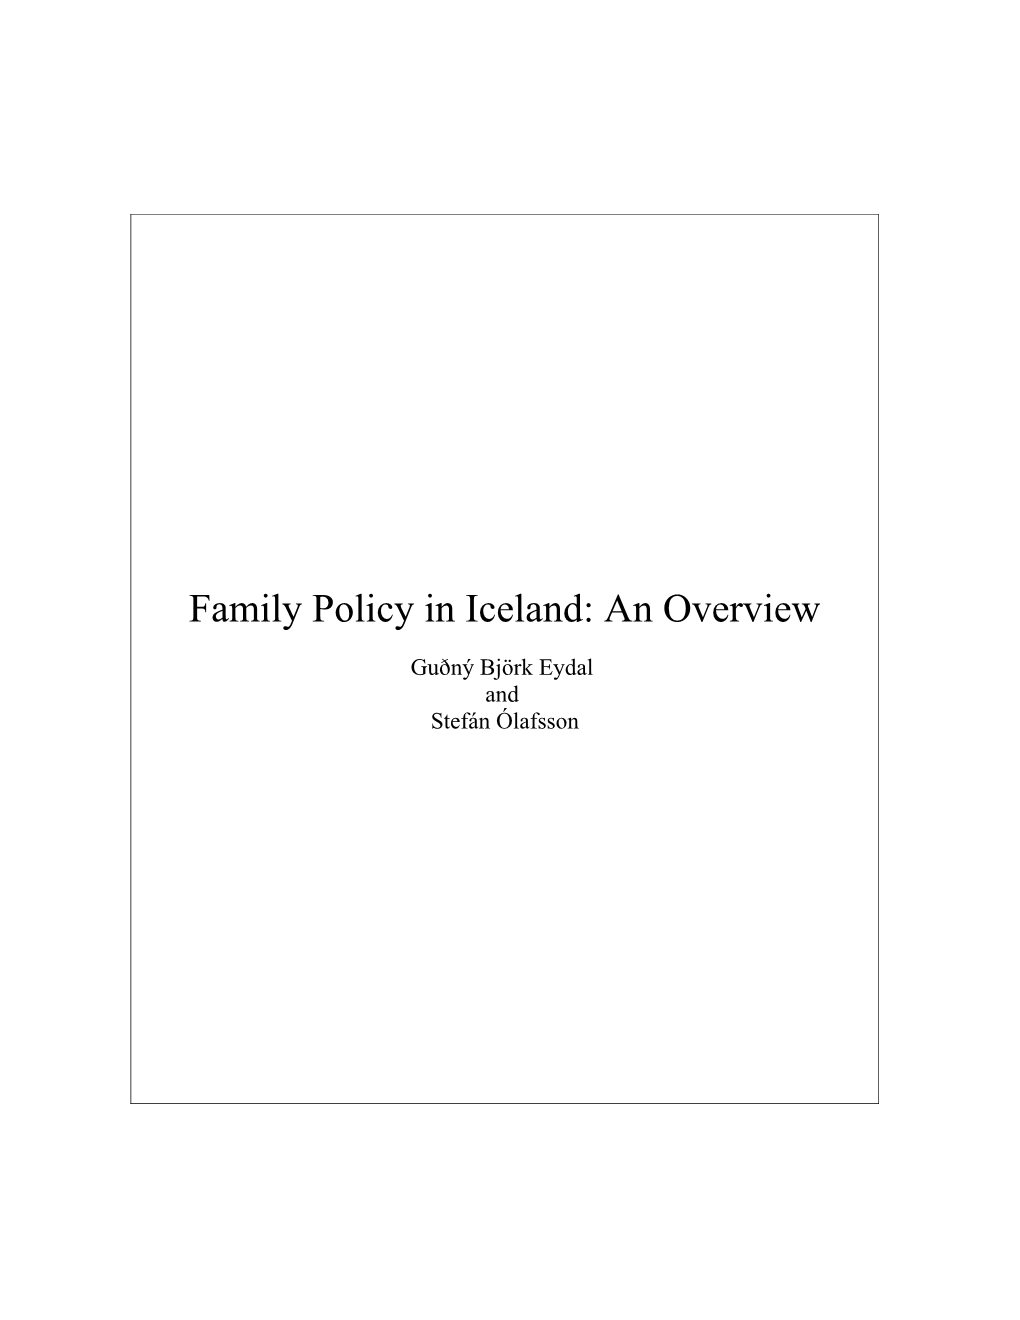 Family Policy in Iceland: an Overview